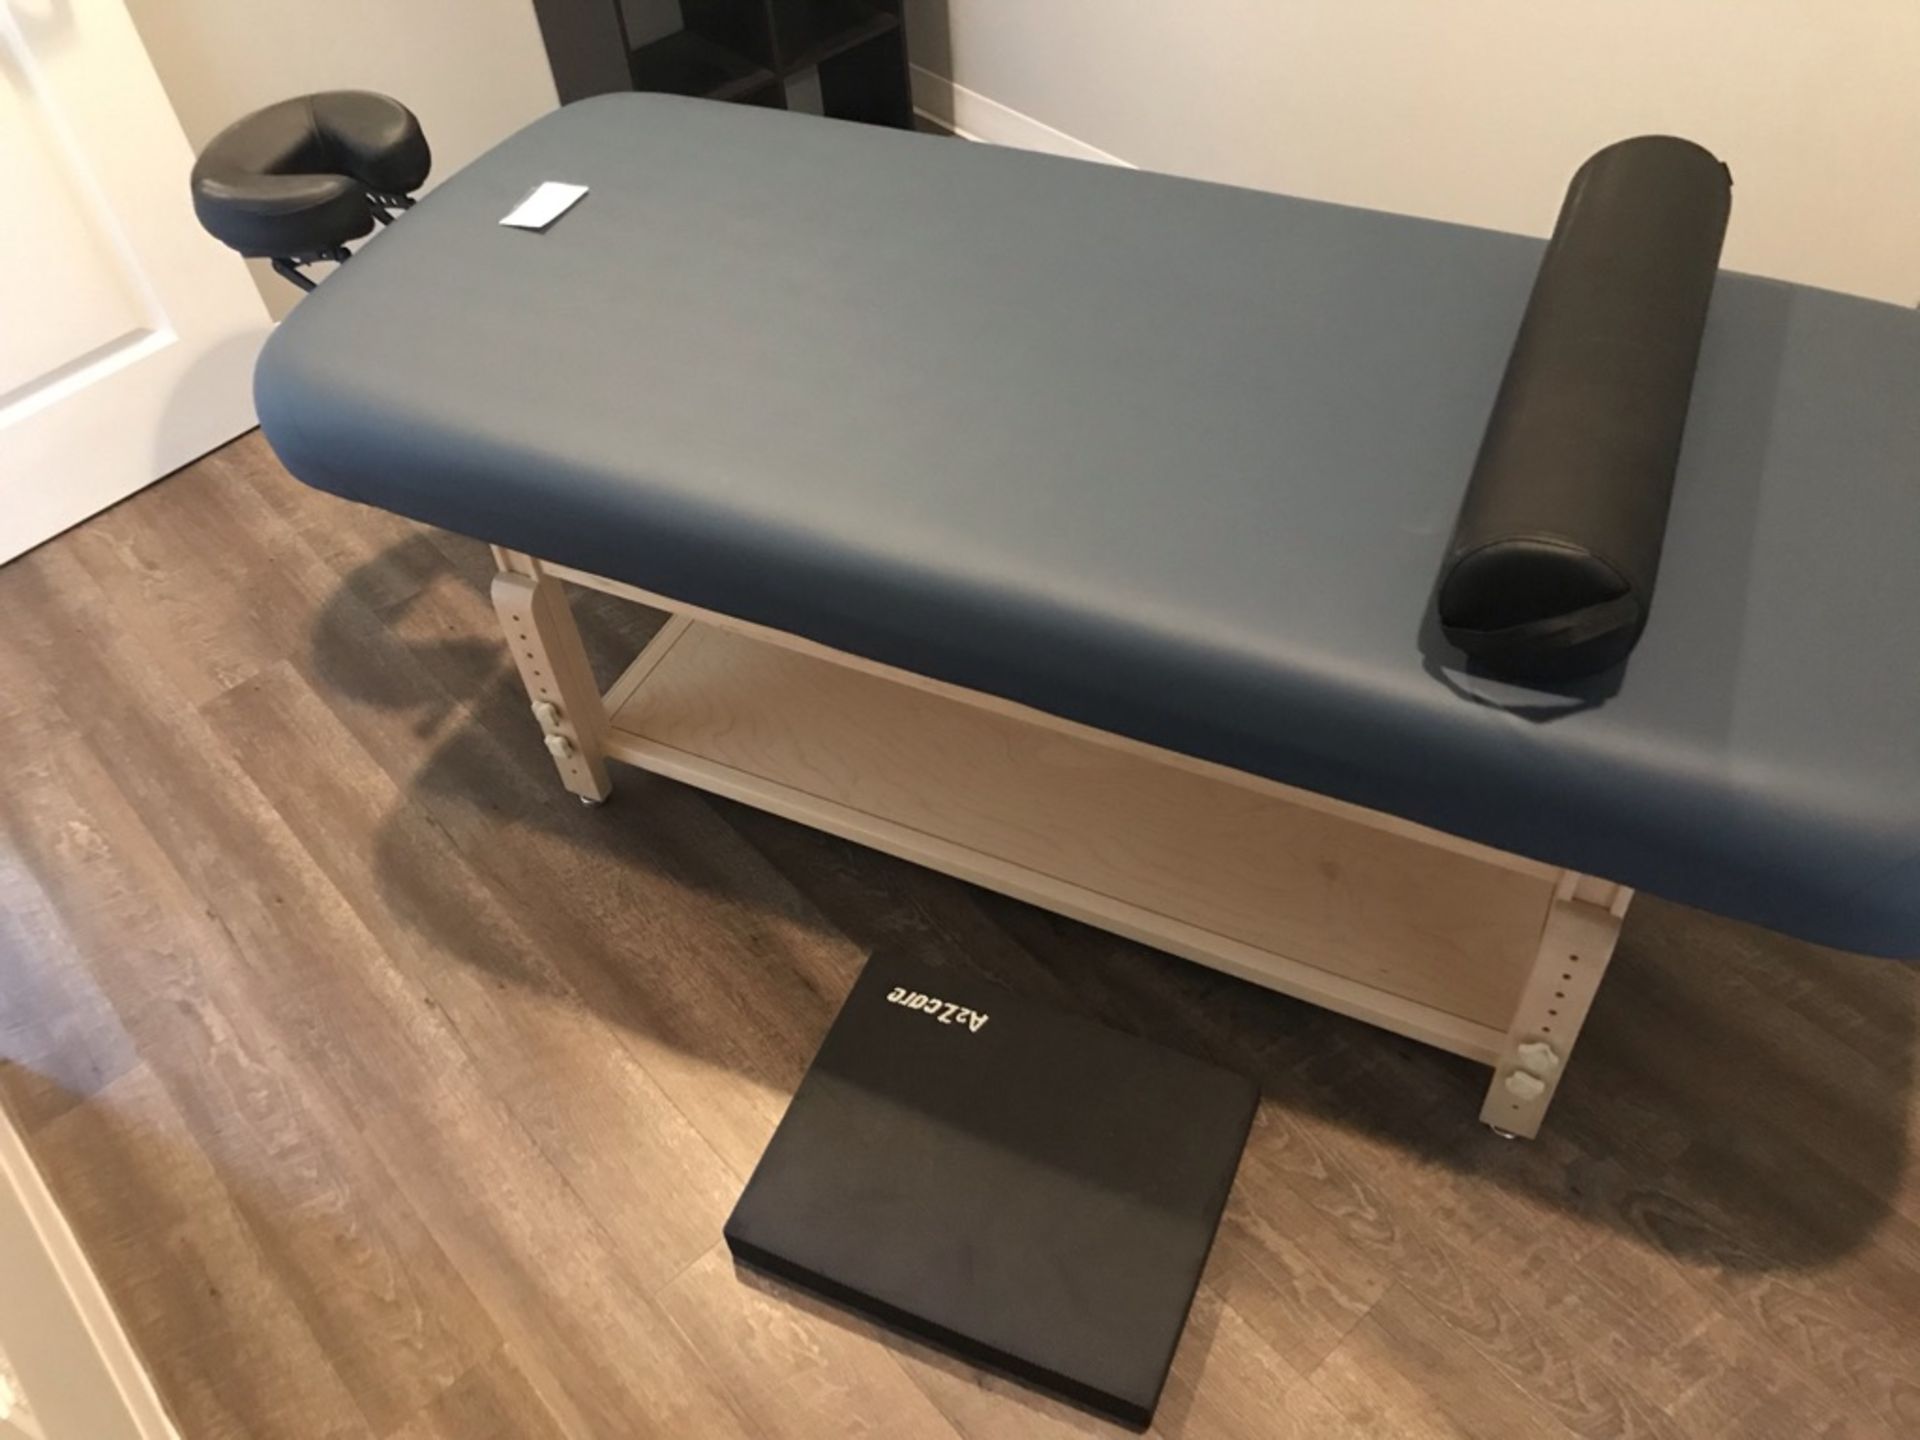 EARTHLITE SEDONA SPA TREATMENT TABLE, BLUE, WITH FACE CRADLE, LEG SUPPORT, AND A2ZCARE FLOOR PAD